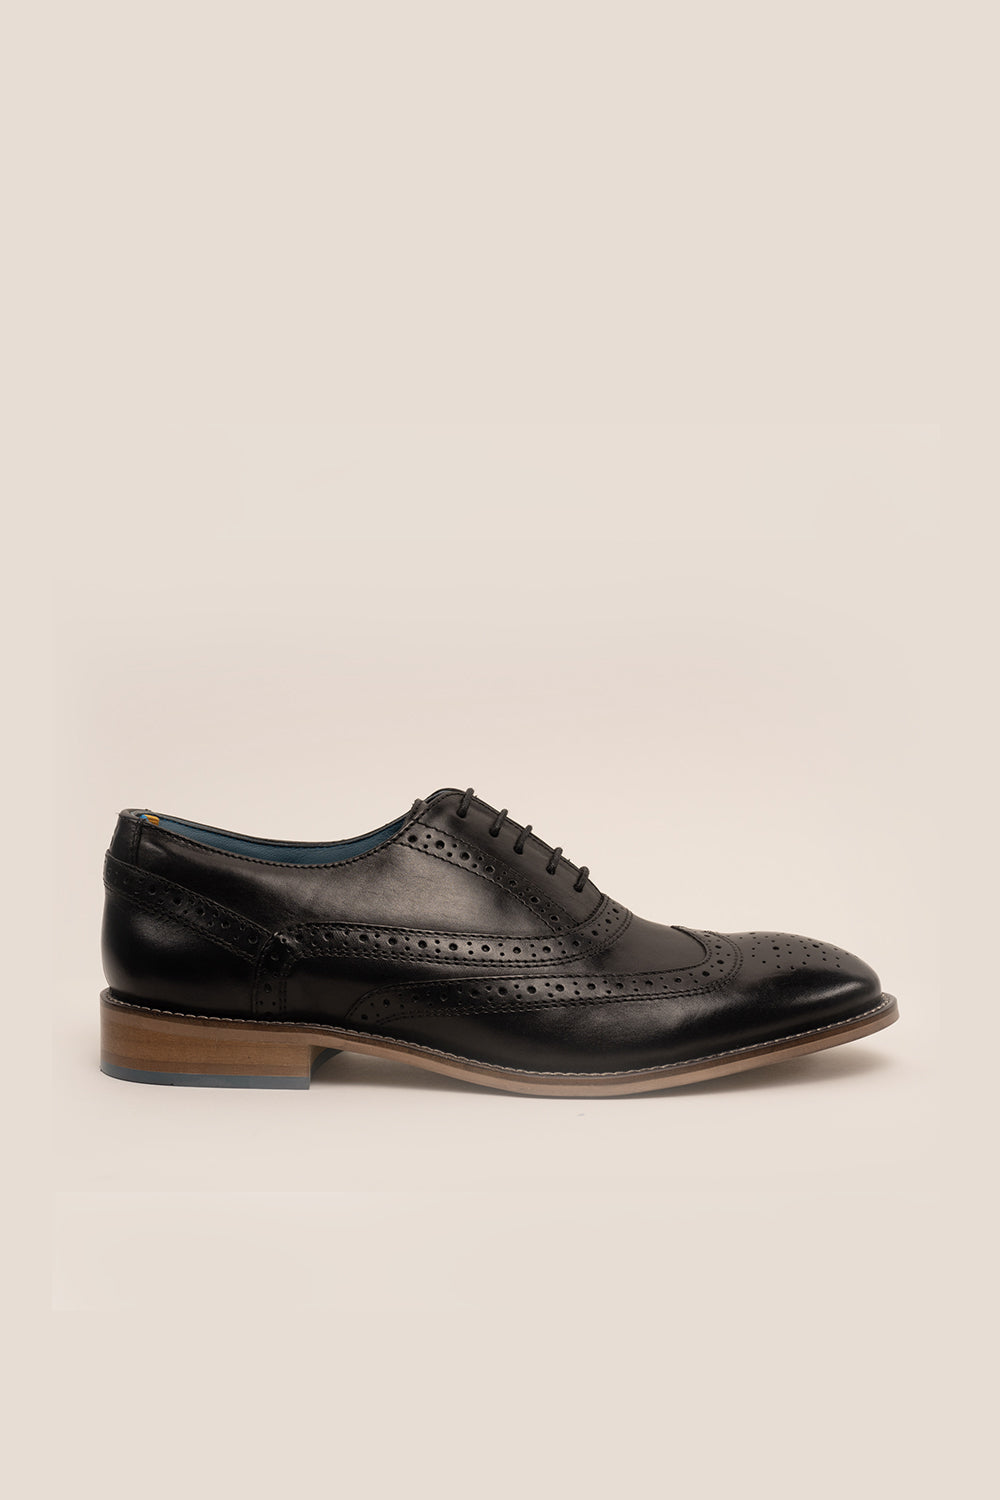 Winston Mens Black Leather Oxford Brogue shoes | Oswin Hyde